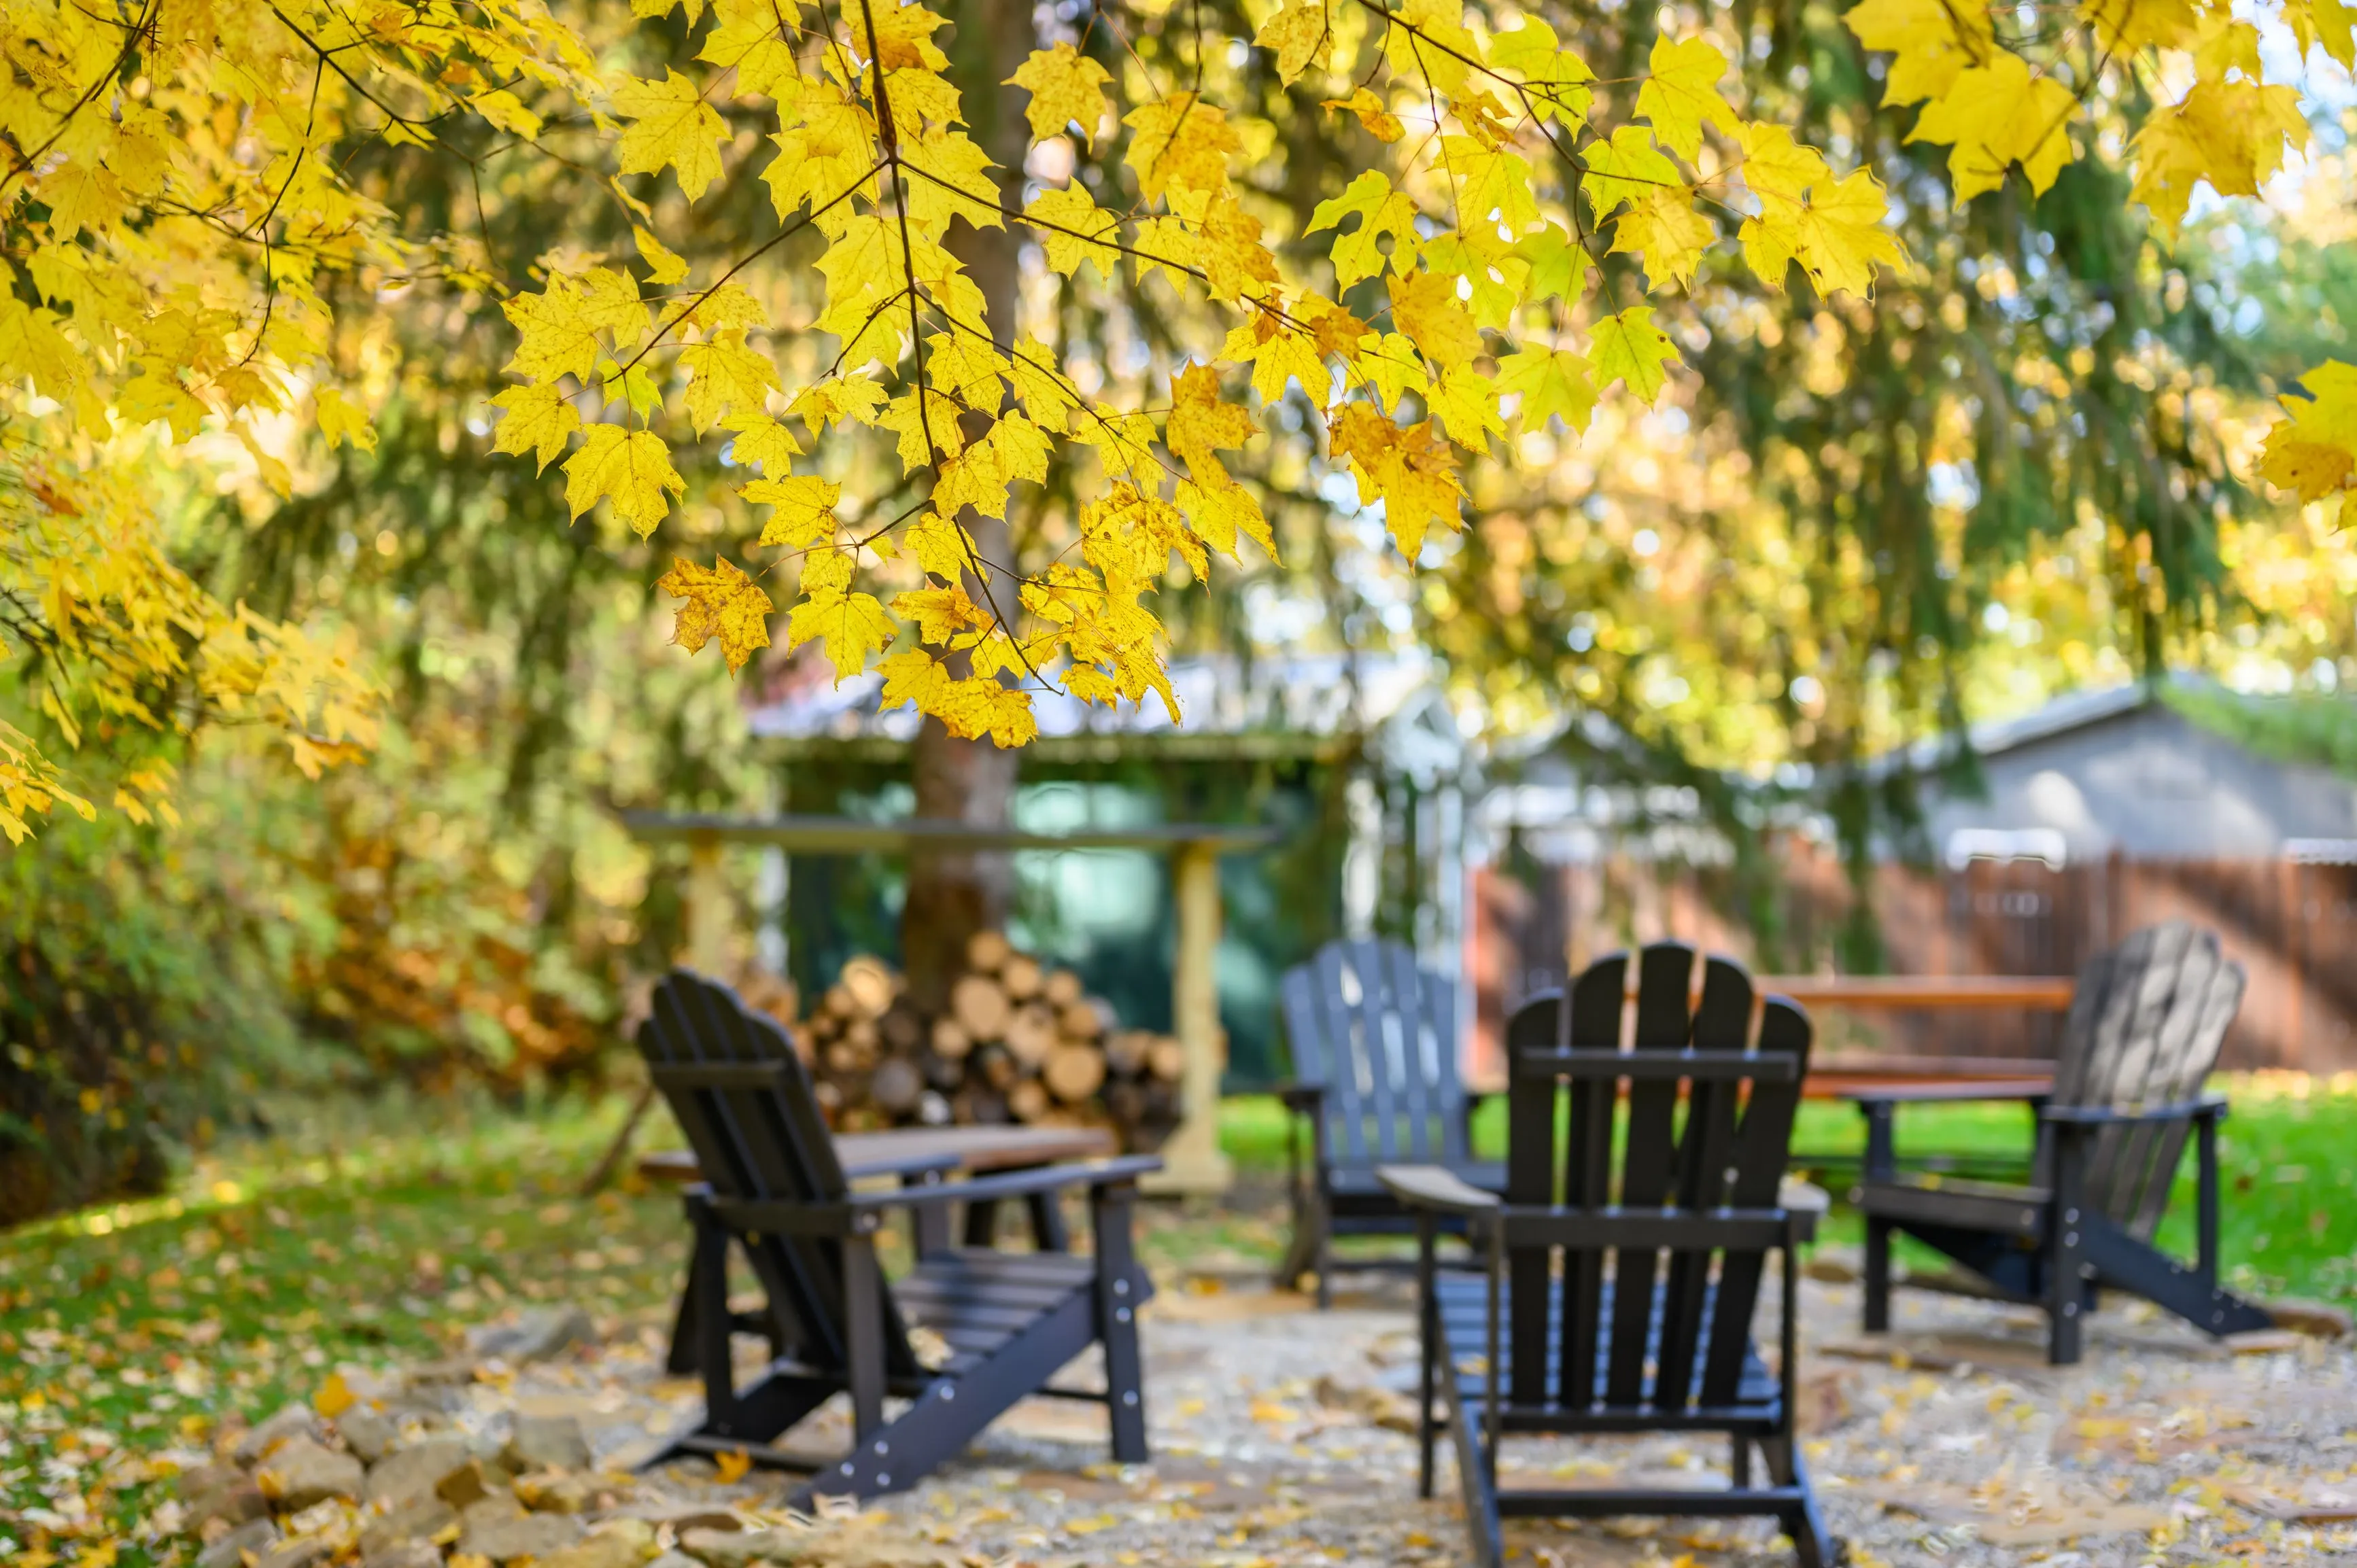 Cozy backyard setting with Adirondack chairs and fallen yellow maple leaves in autumn.